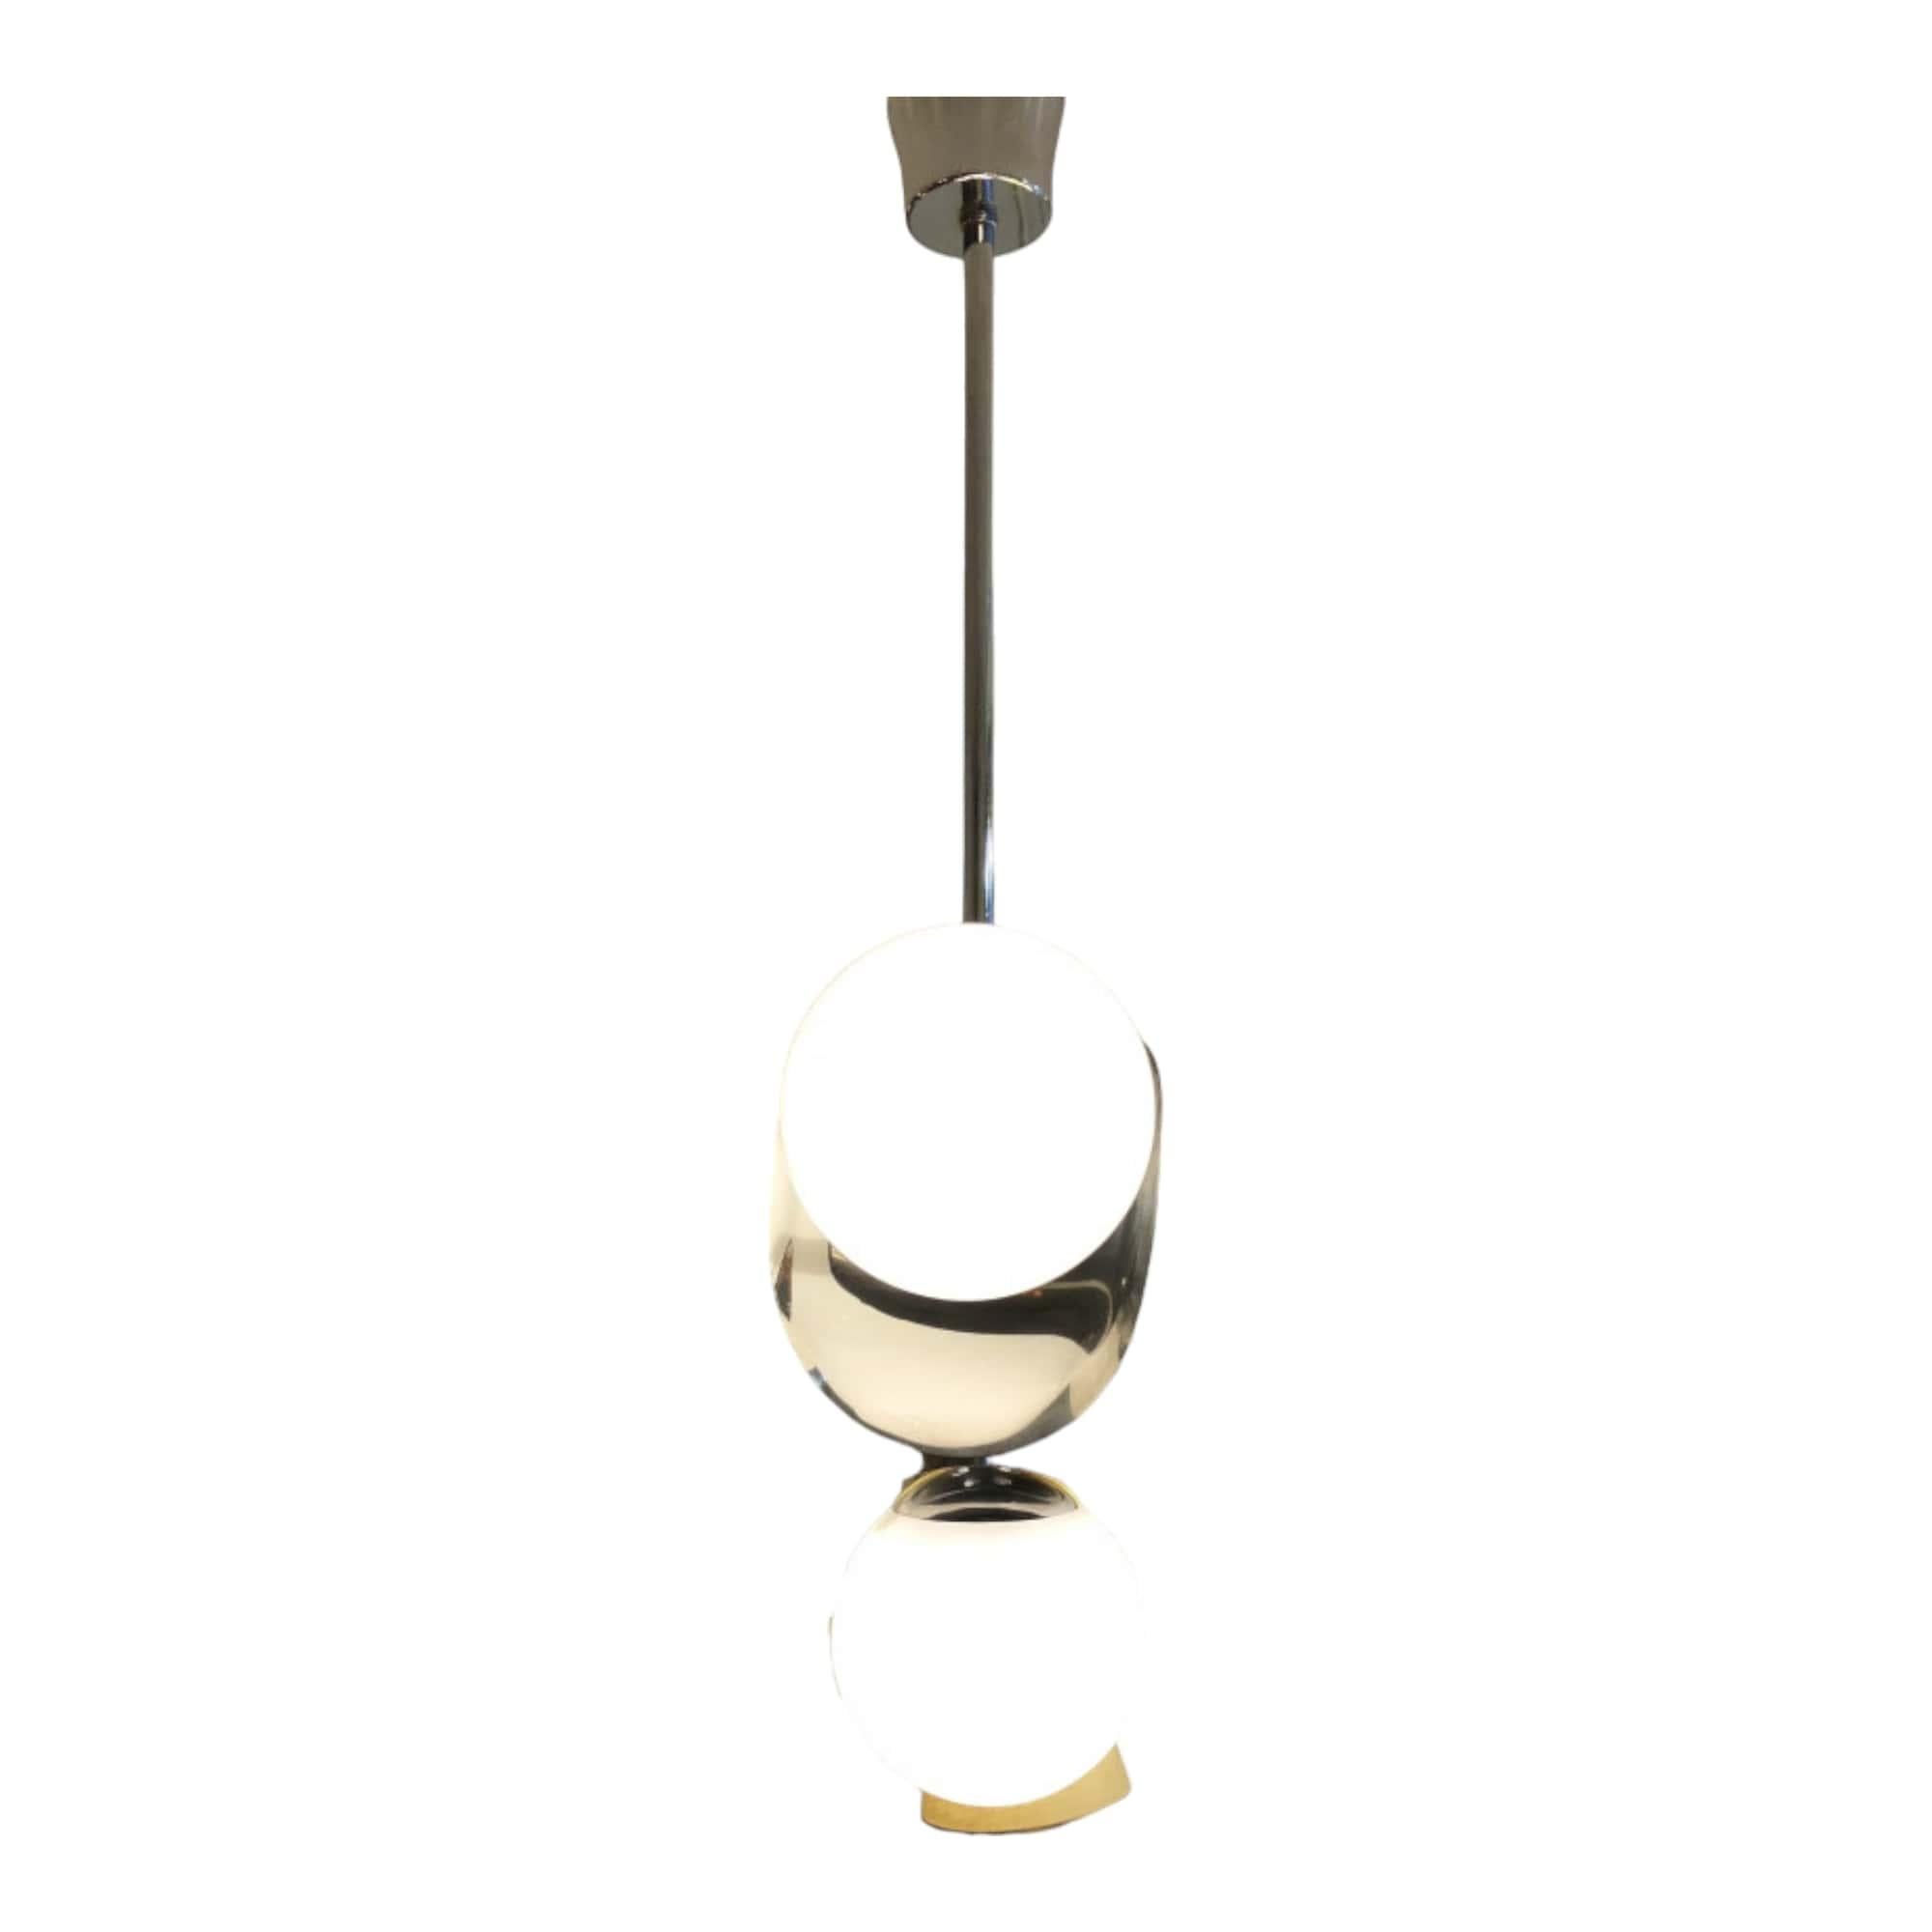 Discover these superb Space Age chandelier designed around 1970, which will bring a touch of elegance and charm to your interior. Each piece is carefully selected for its quality and authenticity, ensuring added value to your interior. The detailed